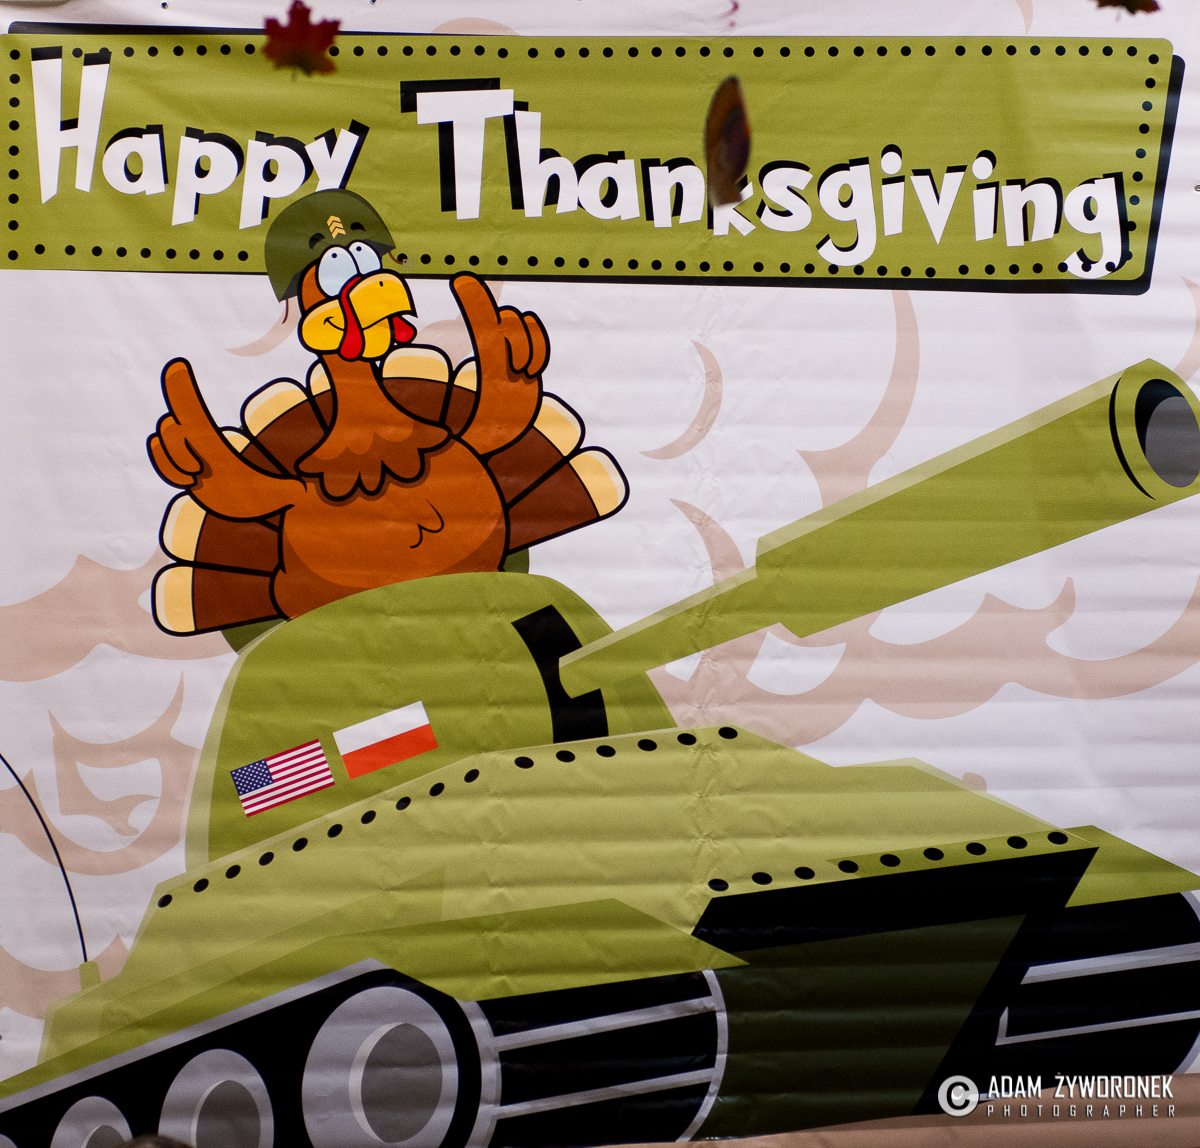 HAPPY THANKSGIVING DAY!